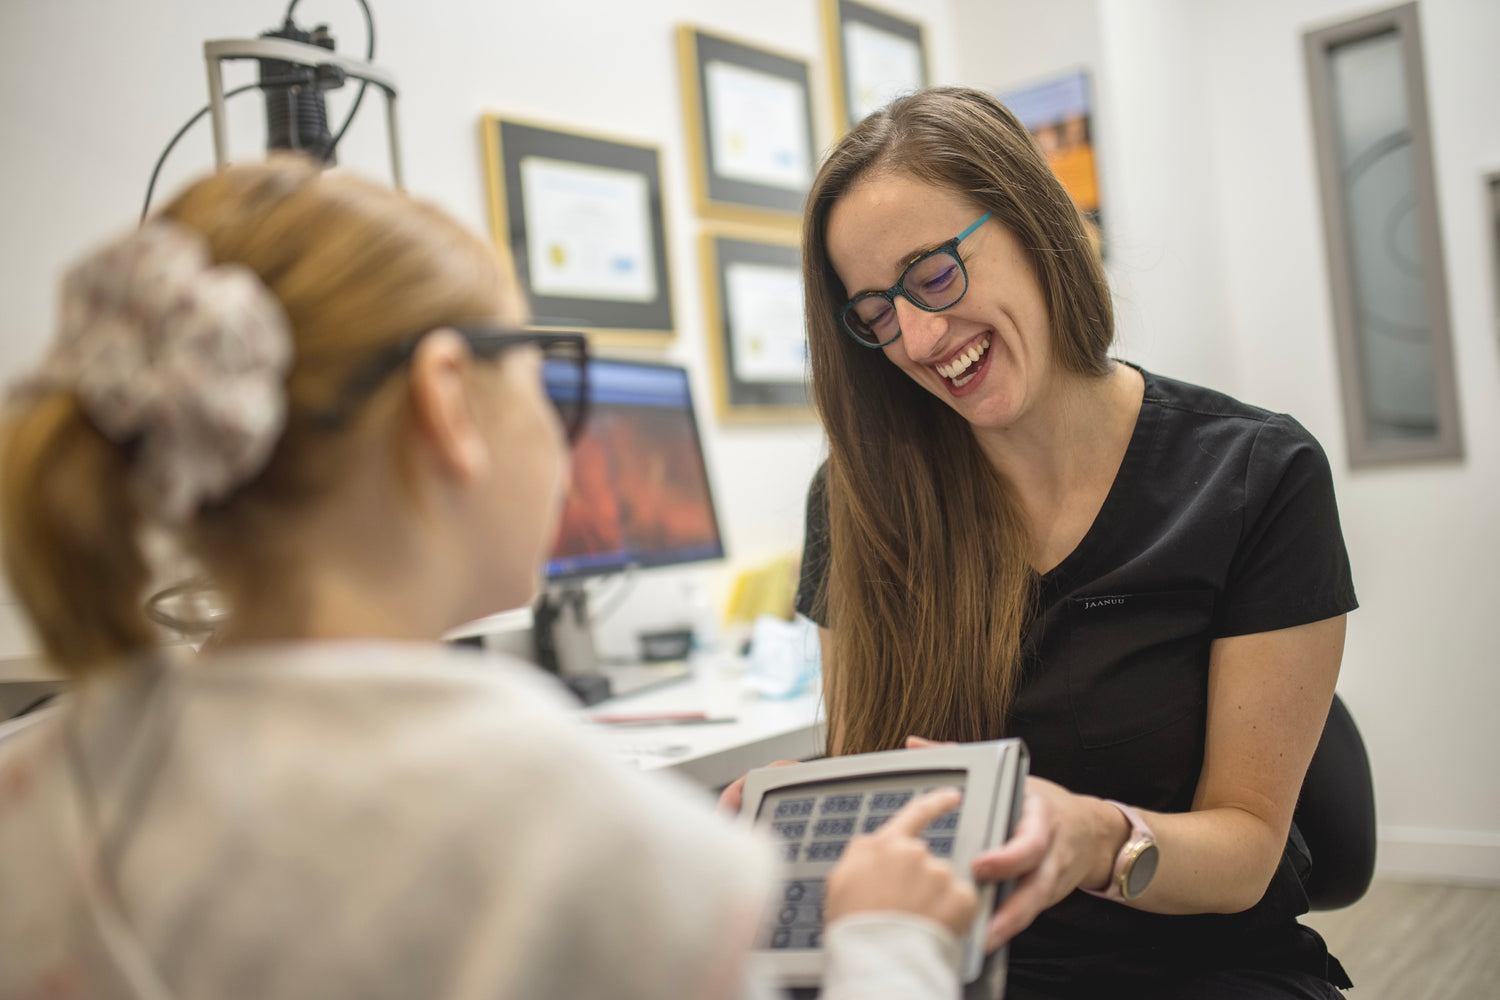 Dr. Leanne Roach is smiling while while holding a chart during an eye exam. A child, wearing special black glasses is pointing at the chart.